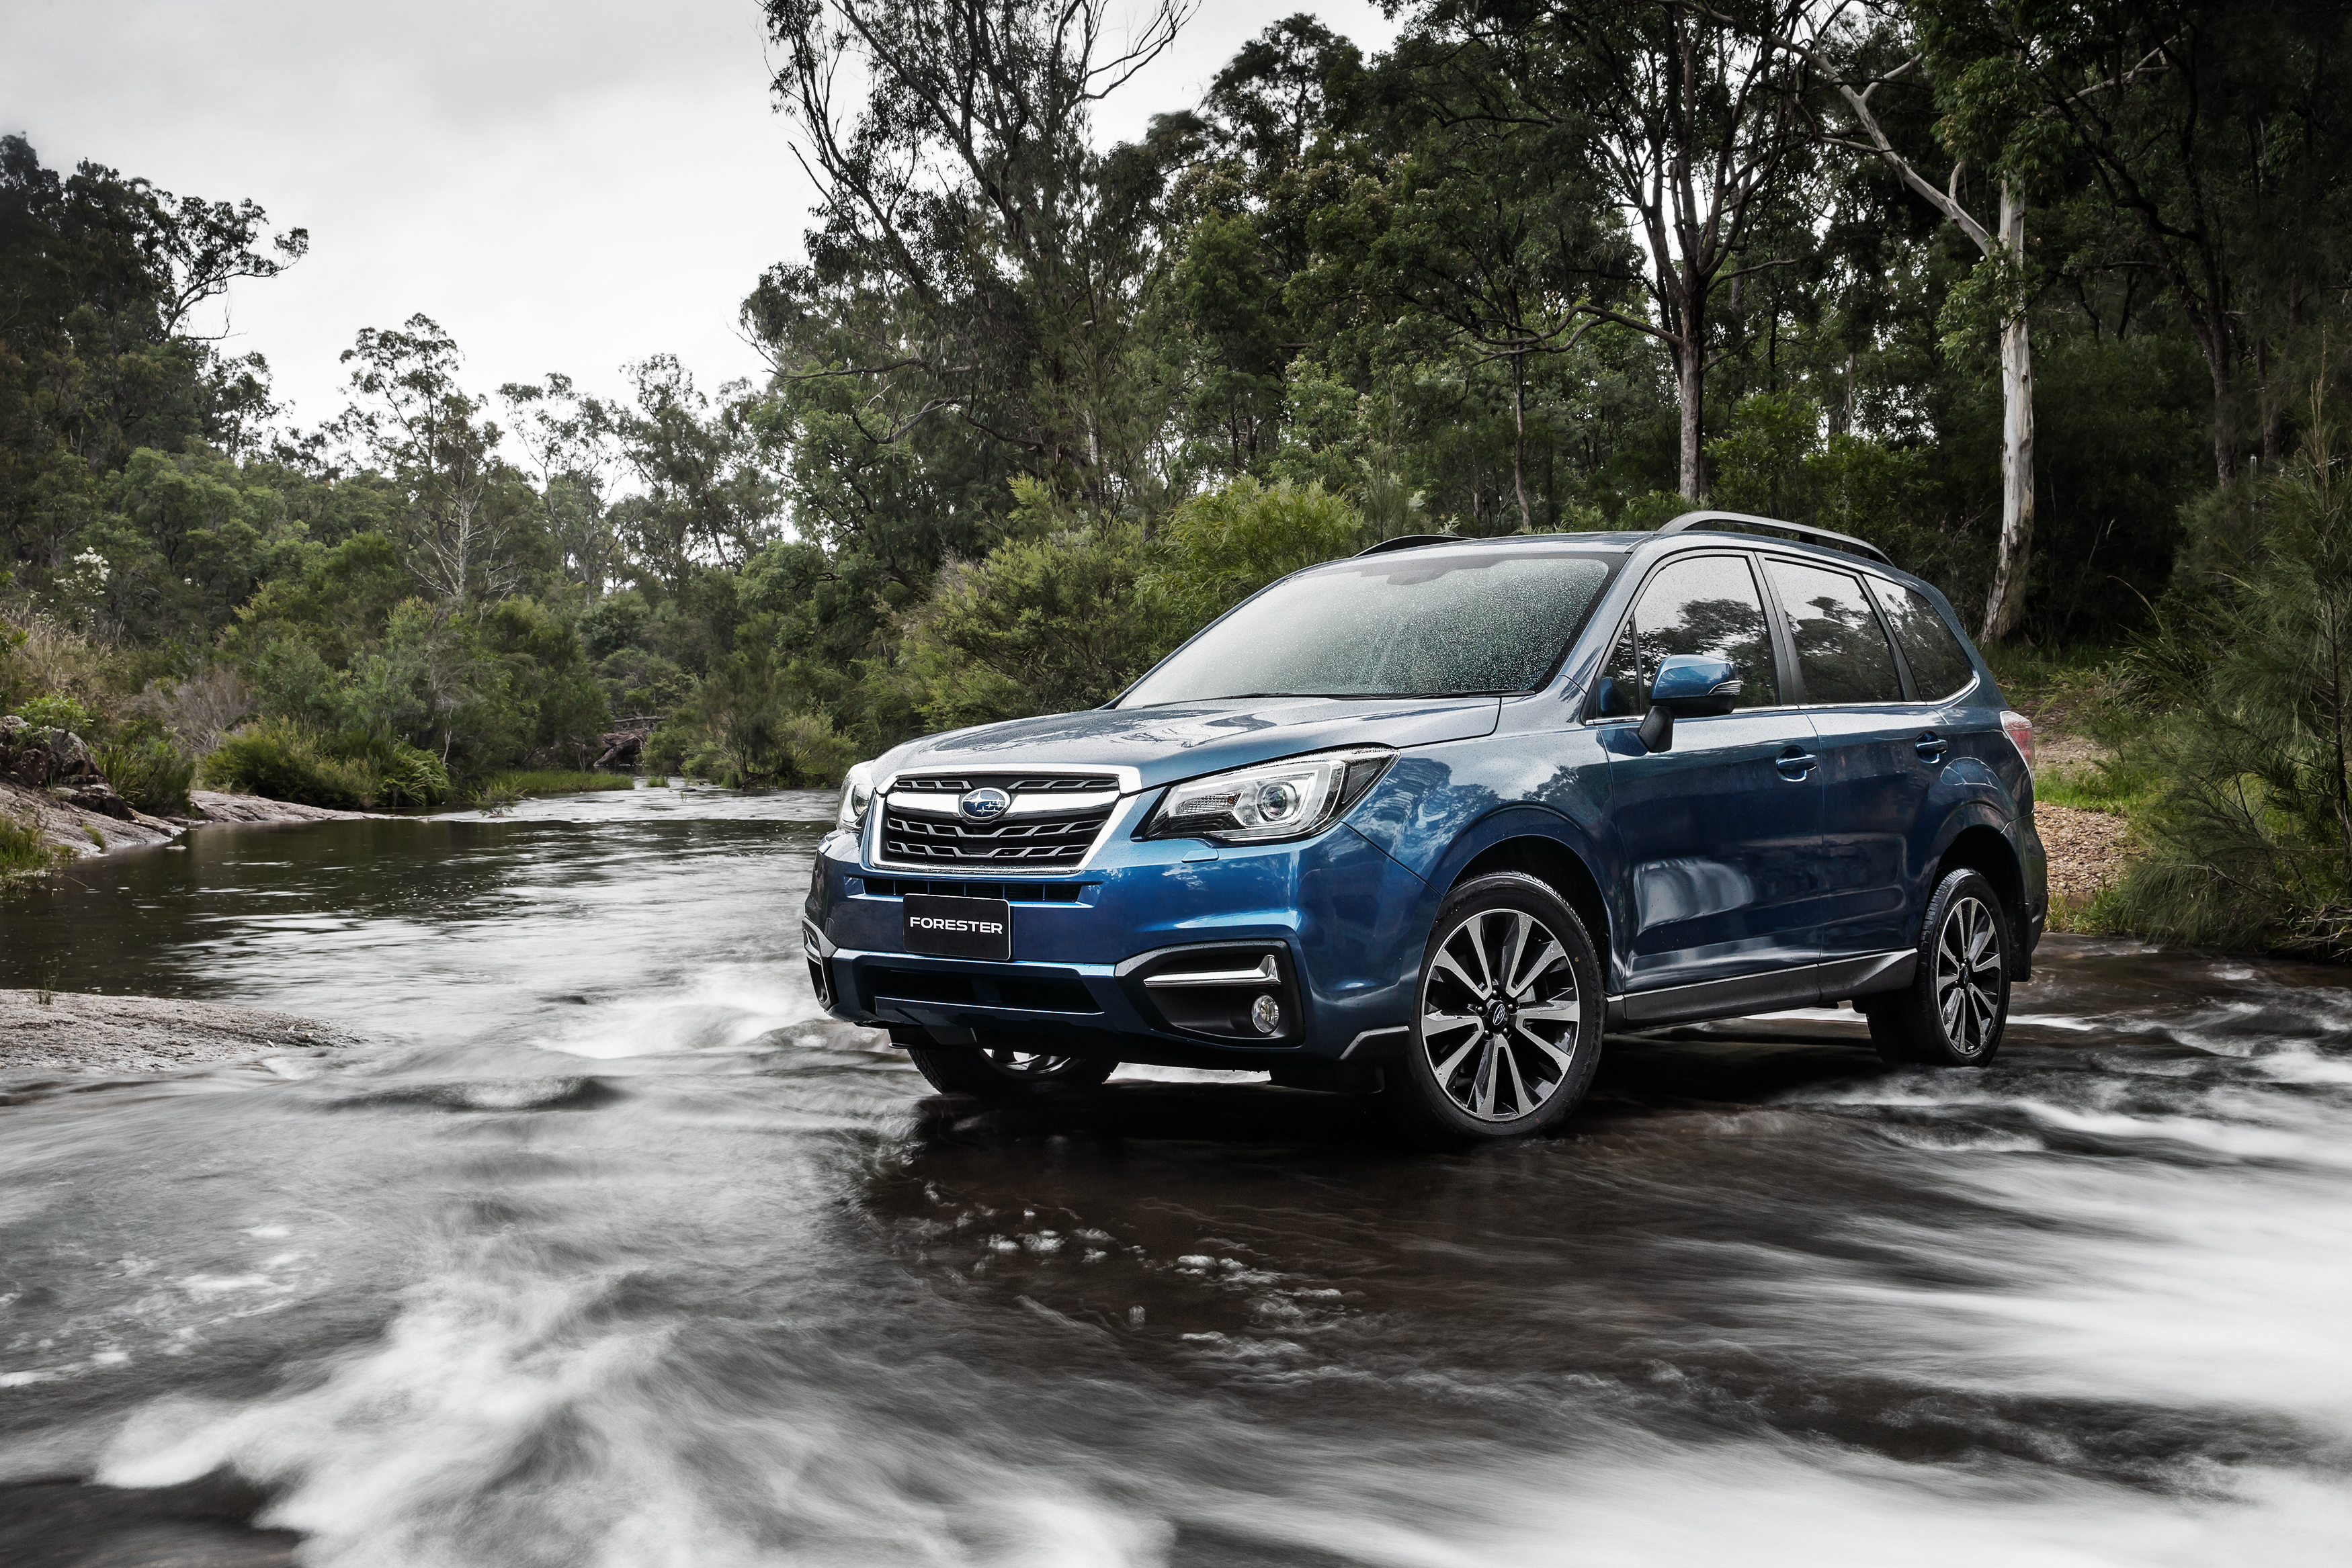 1080p Subaru Forester Hd Images